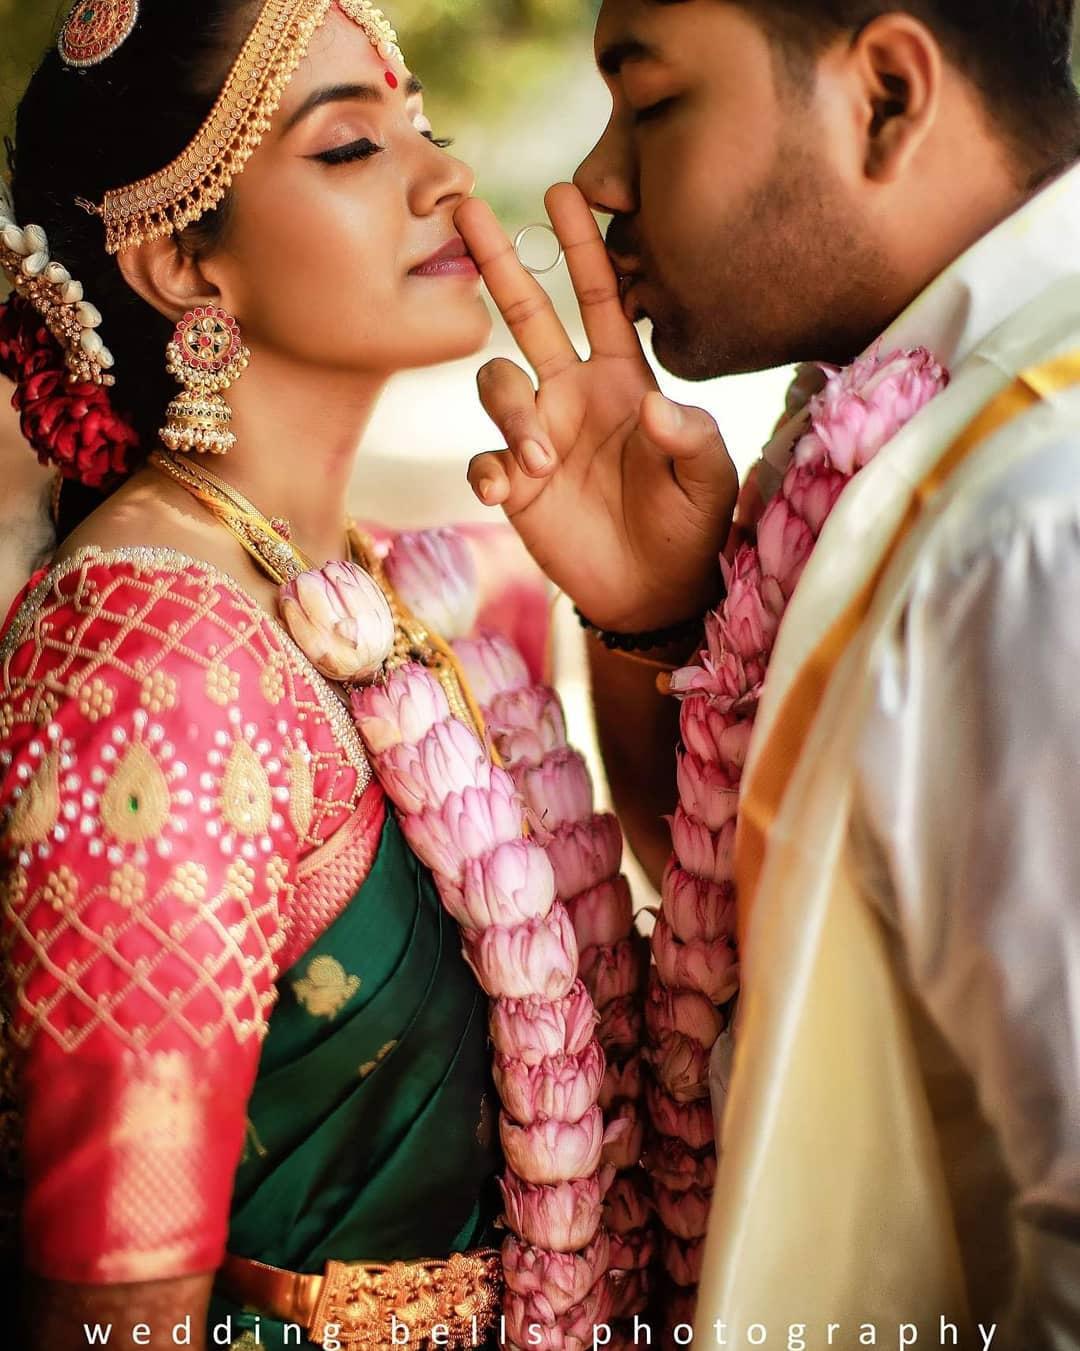 Indian Weddings Couple Photos and Images & Pictures | Shutterstock